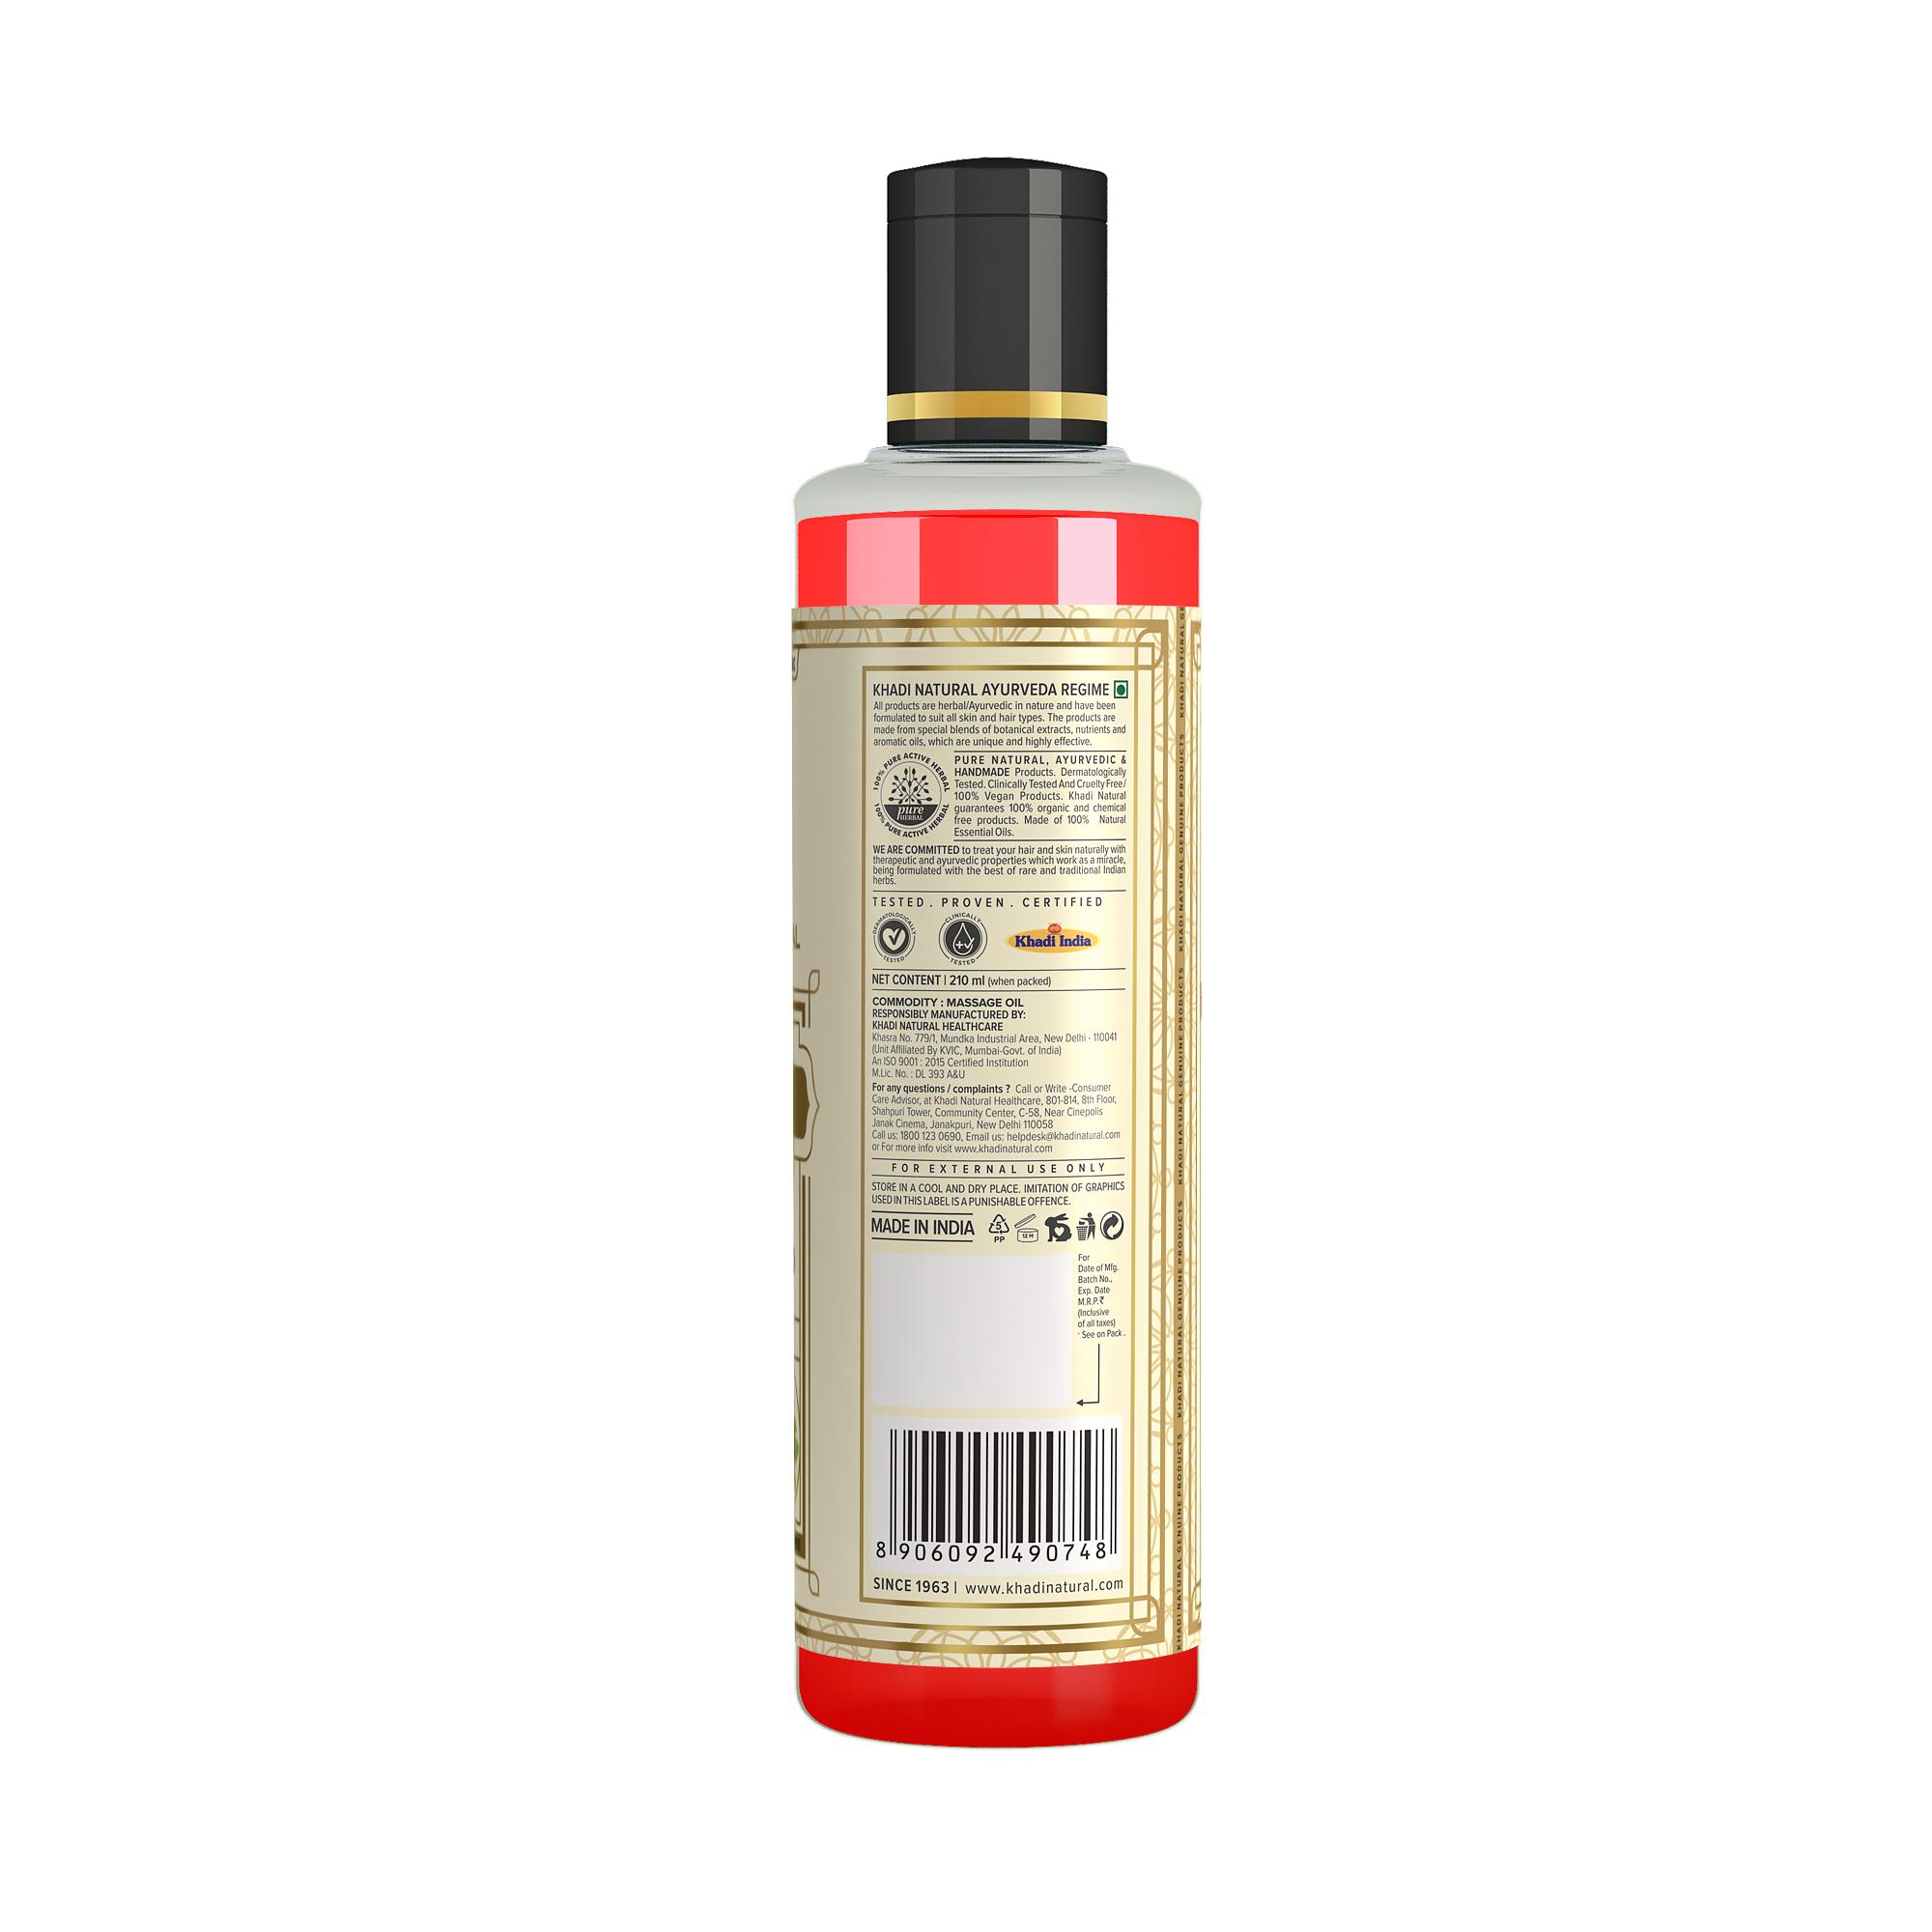 Khadi Natural Sandalwood Massage Oil- Without Mineral Oil-210 ml